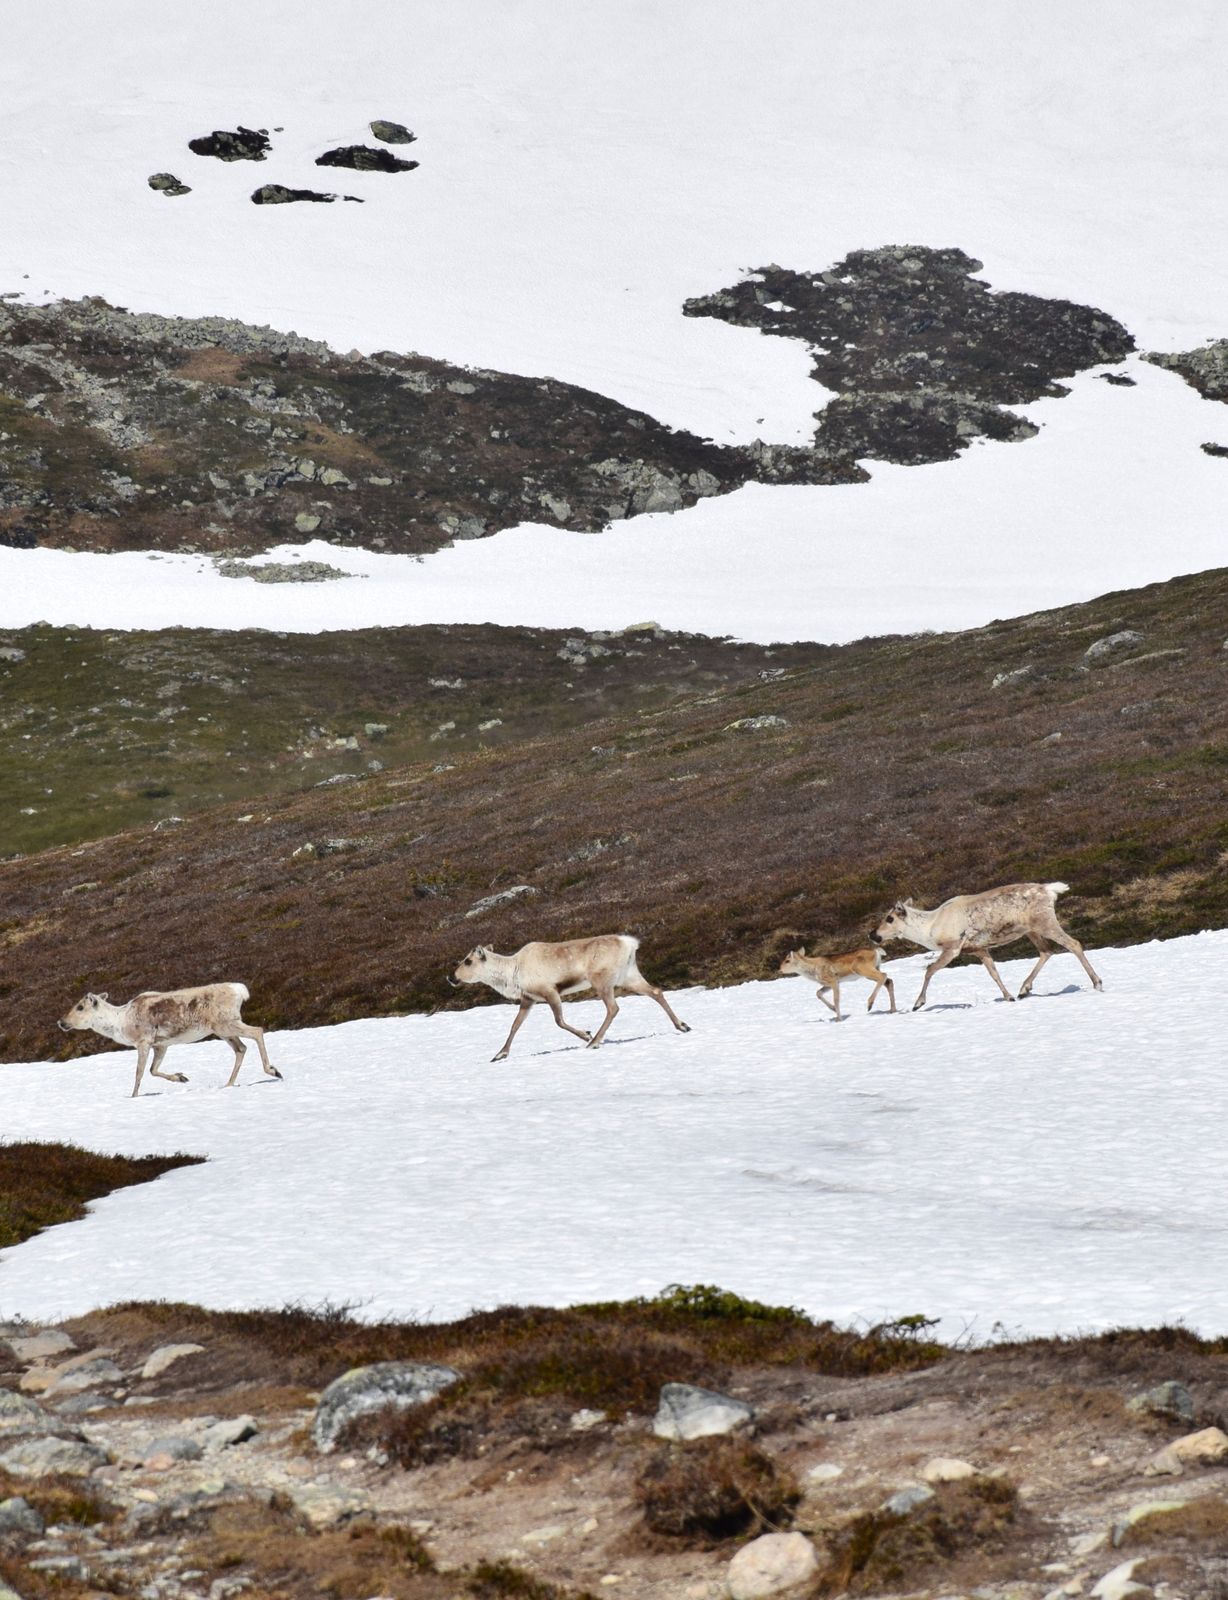 Three white adult caribou and a caribou calf walk across a patch of snow.